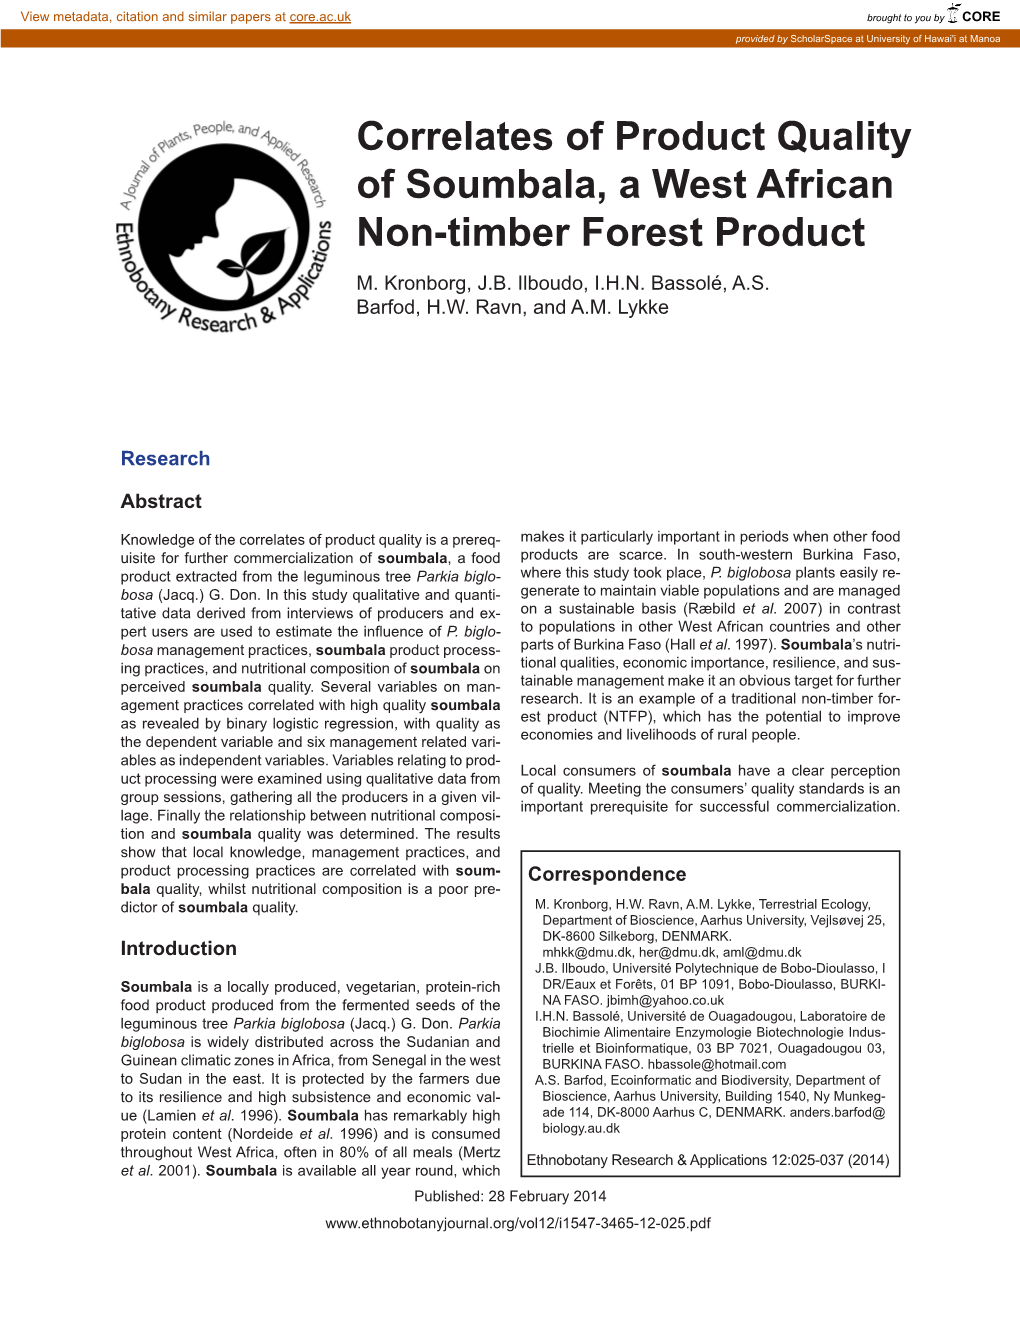 Correlates of Product Quality of Soumbala, a West African Non-Timber Forest Product M